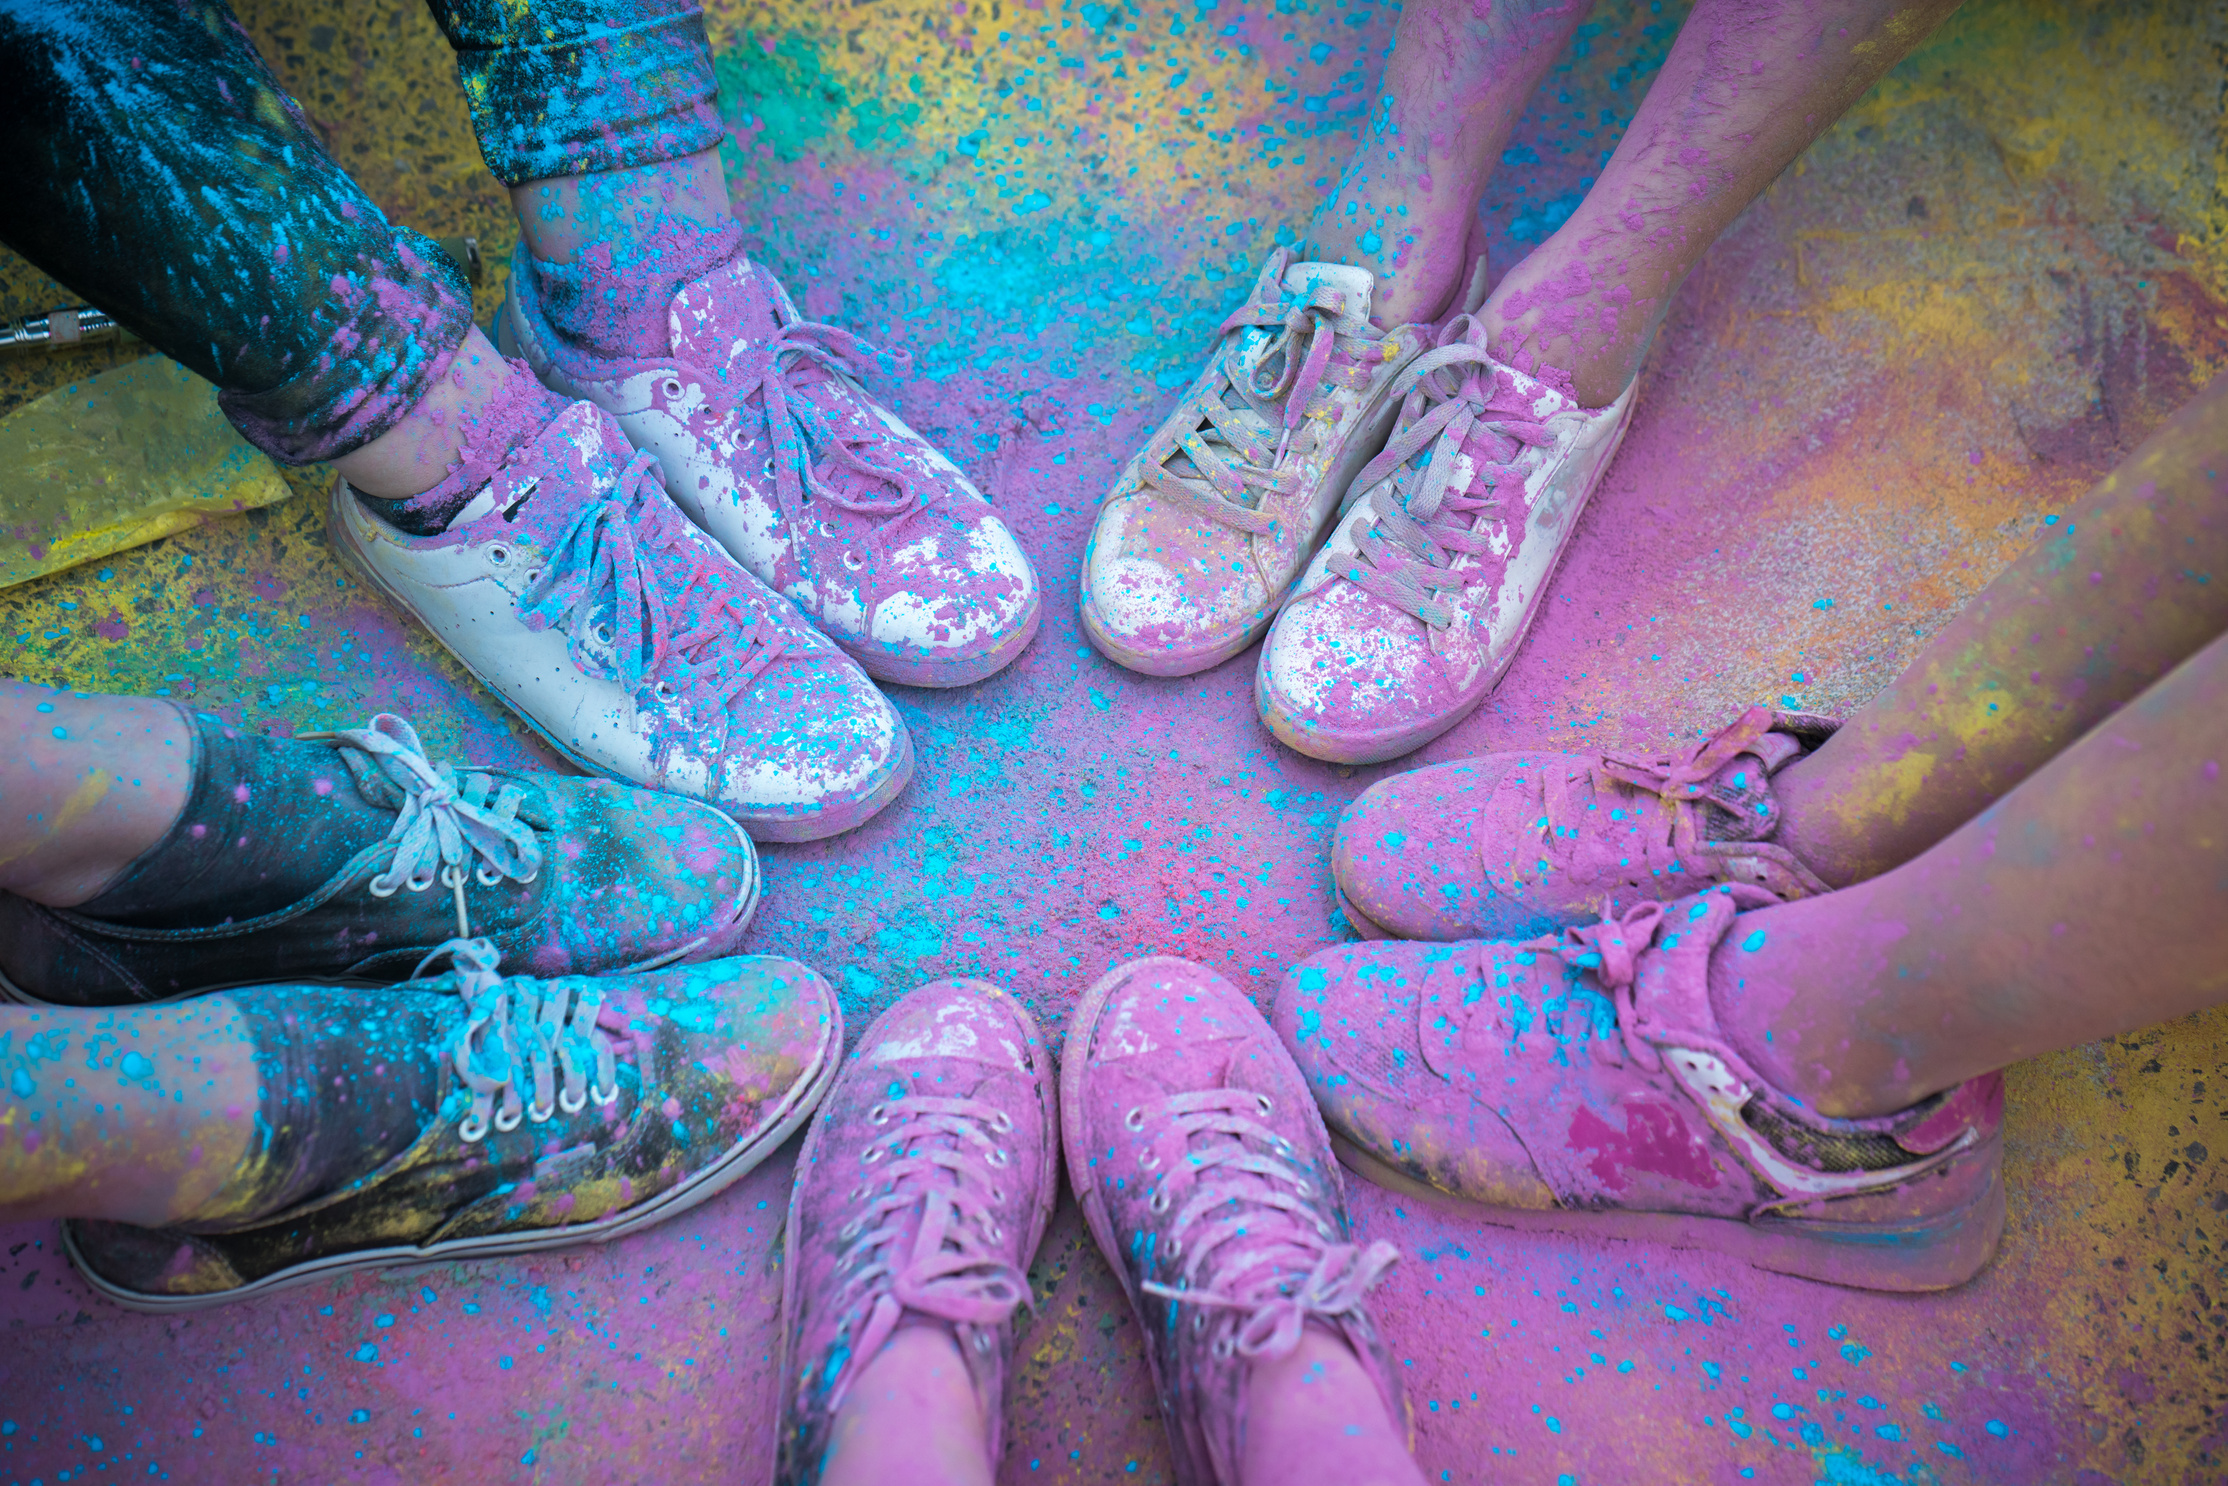 Colorful Shoes and Legs of Teenagers at Color Run Event